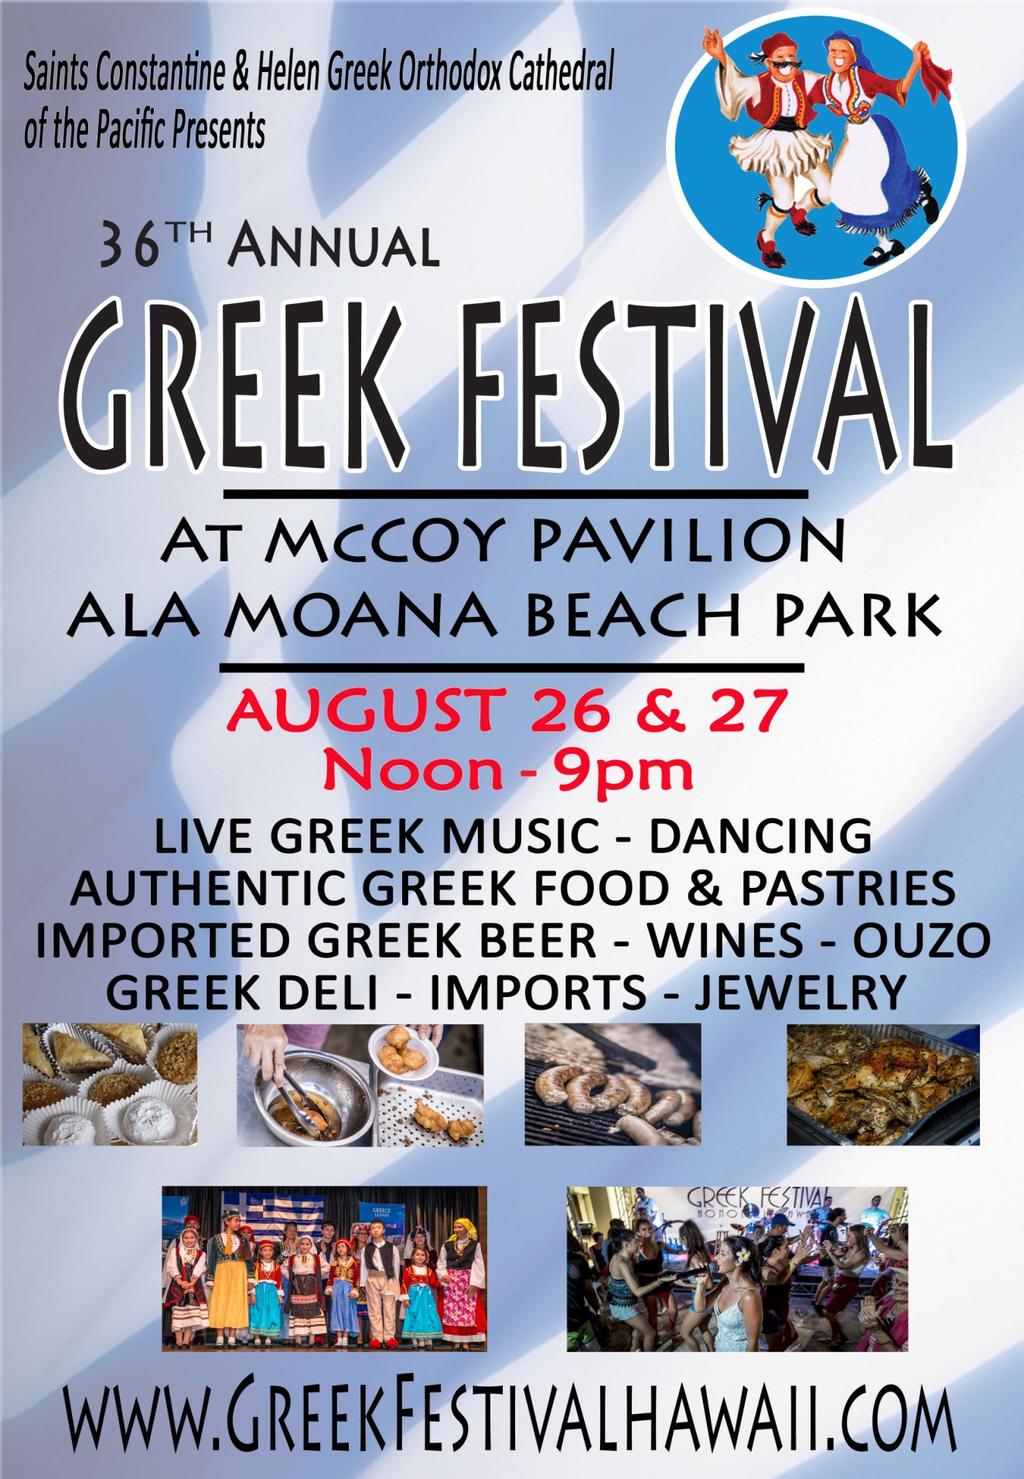 The Greek Festival is fast approaching on August 26 and 27 at McCoy Pavilion.